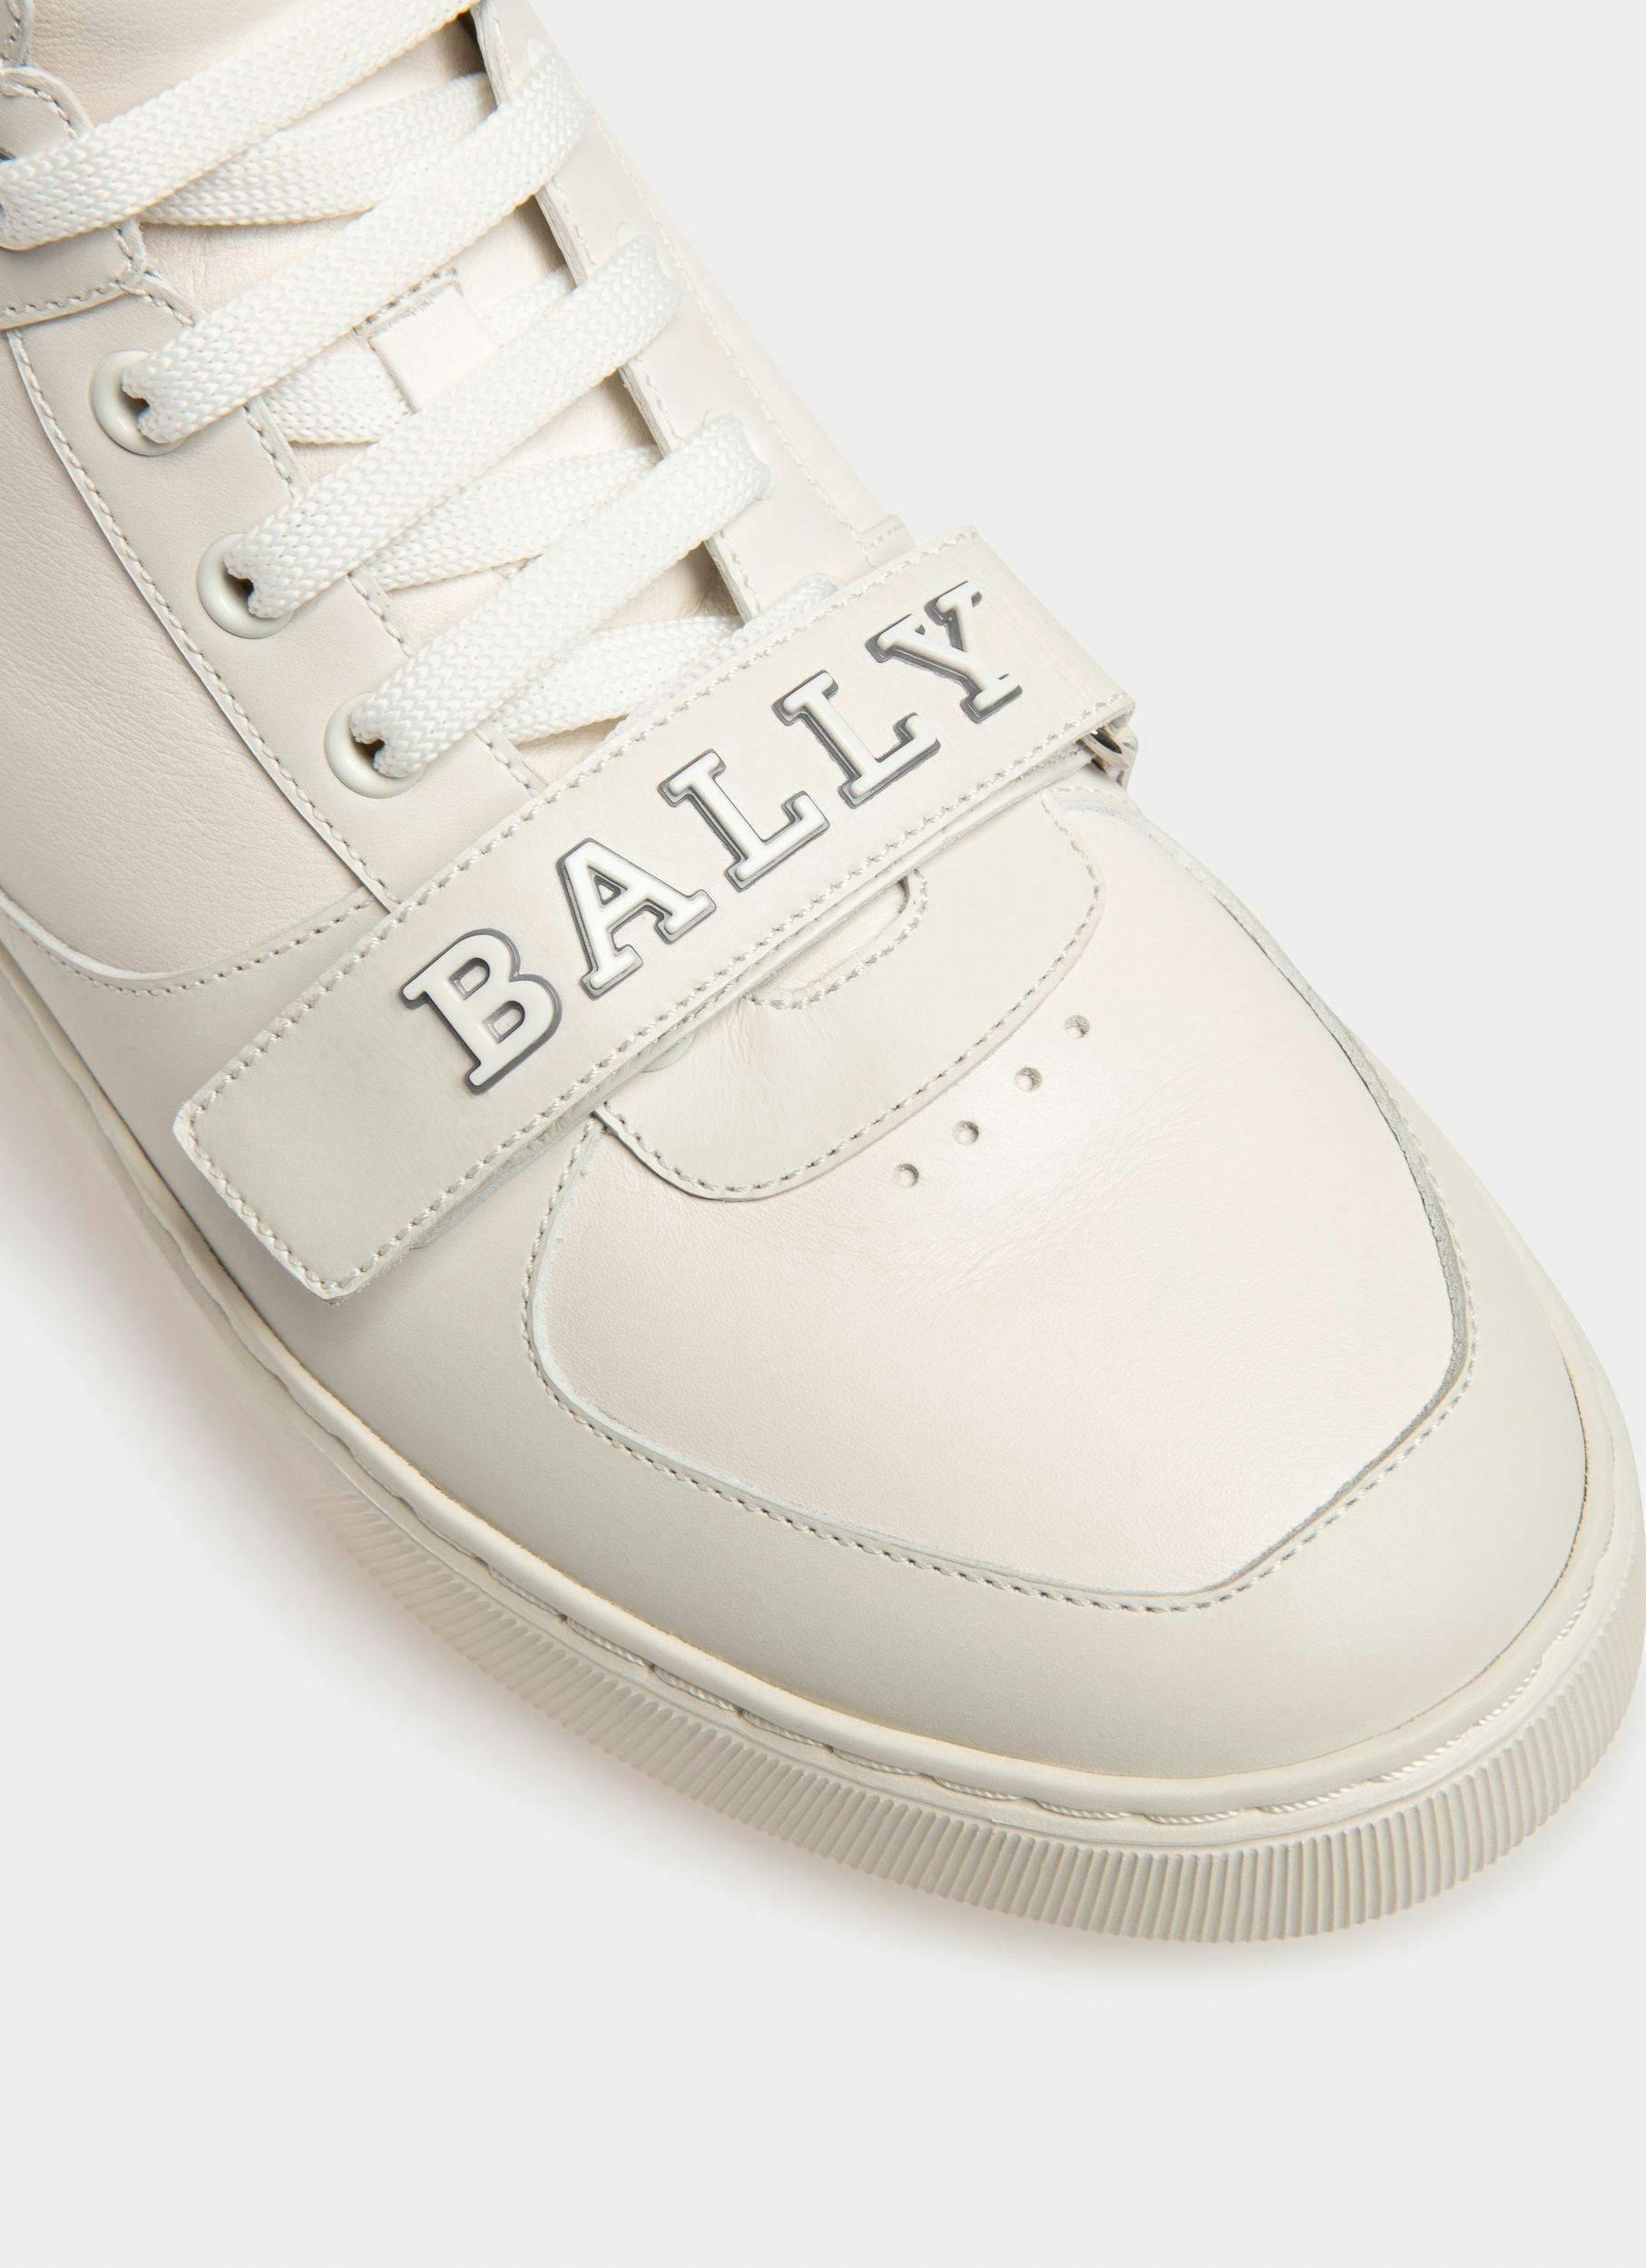 Merryk Leather Sneakers In White - Men's - Bally - 06